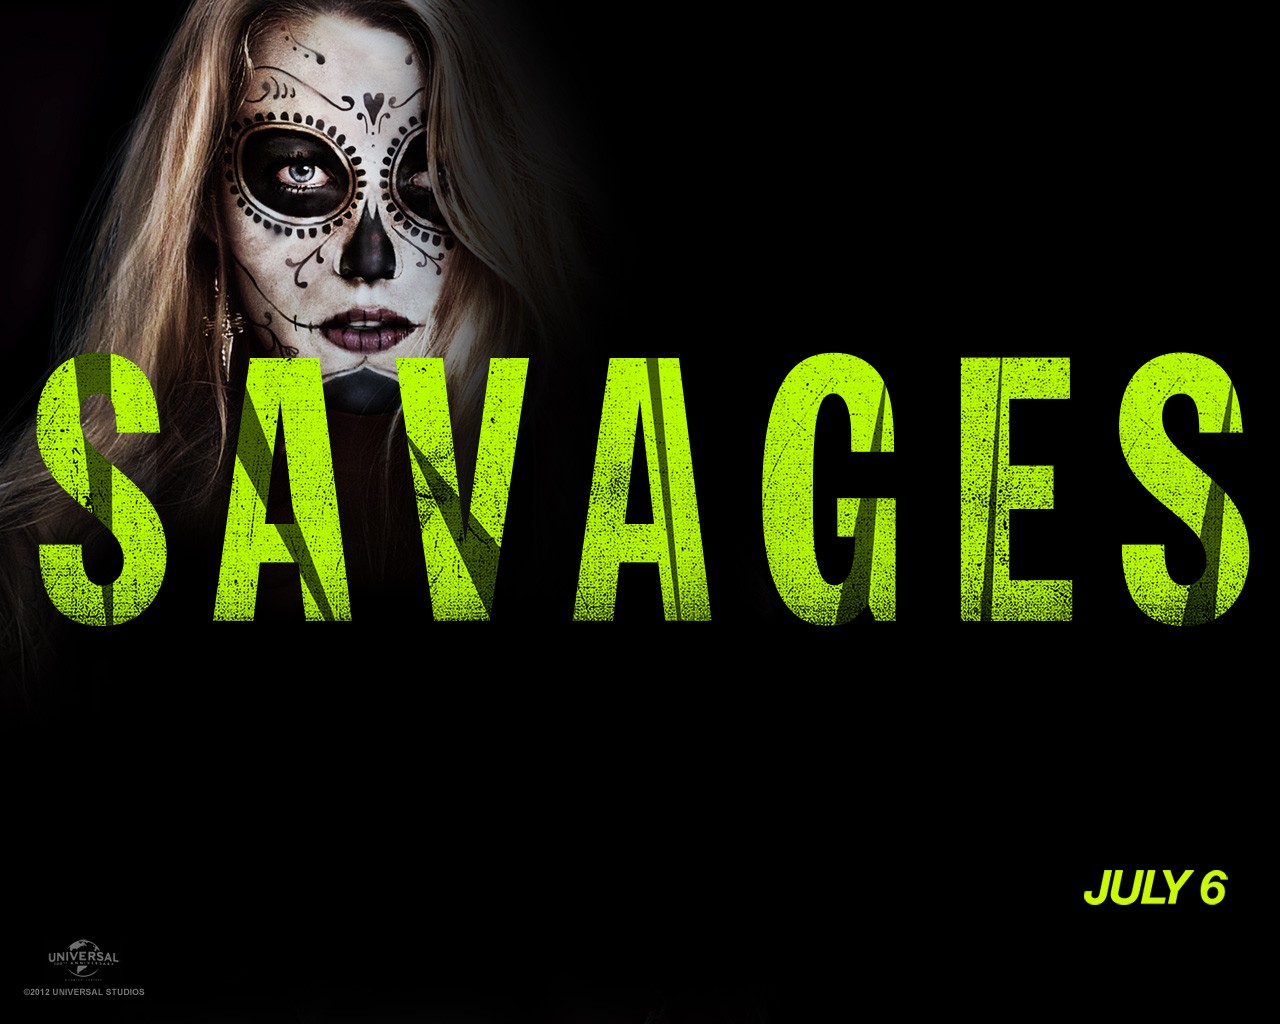 Show Savages Wallpaper Size More